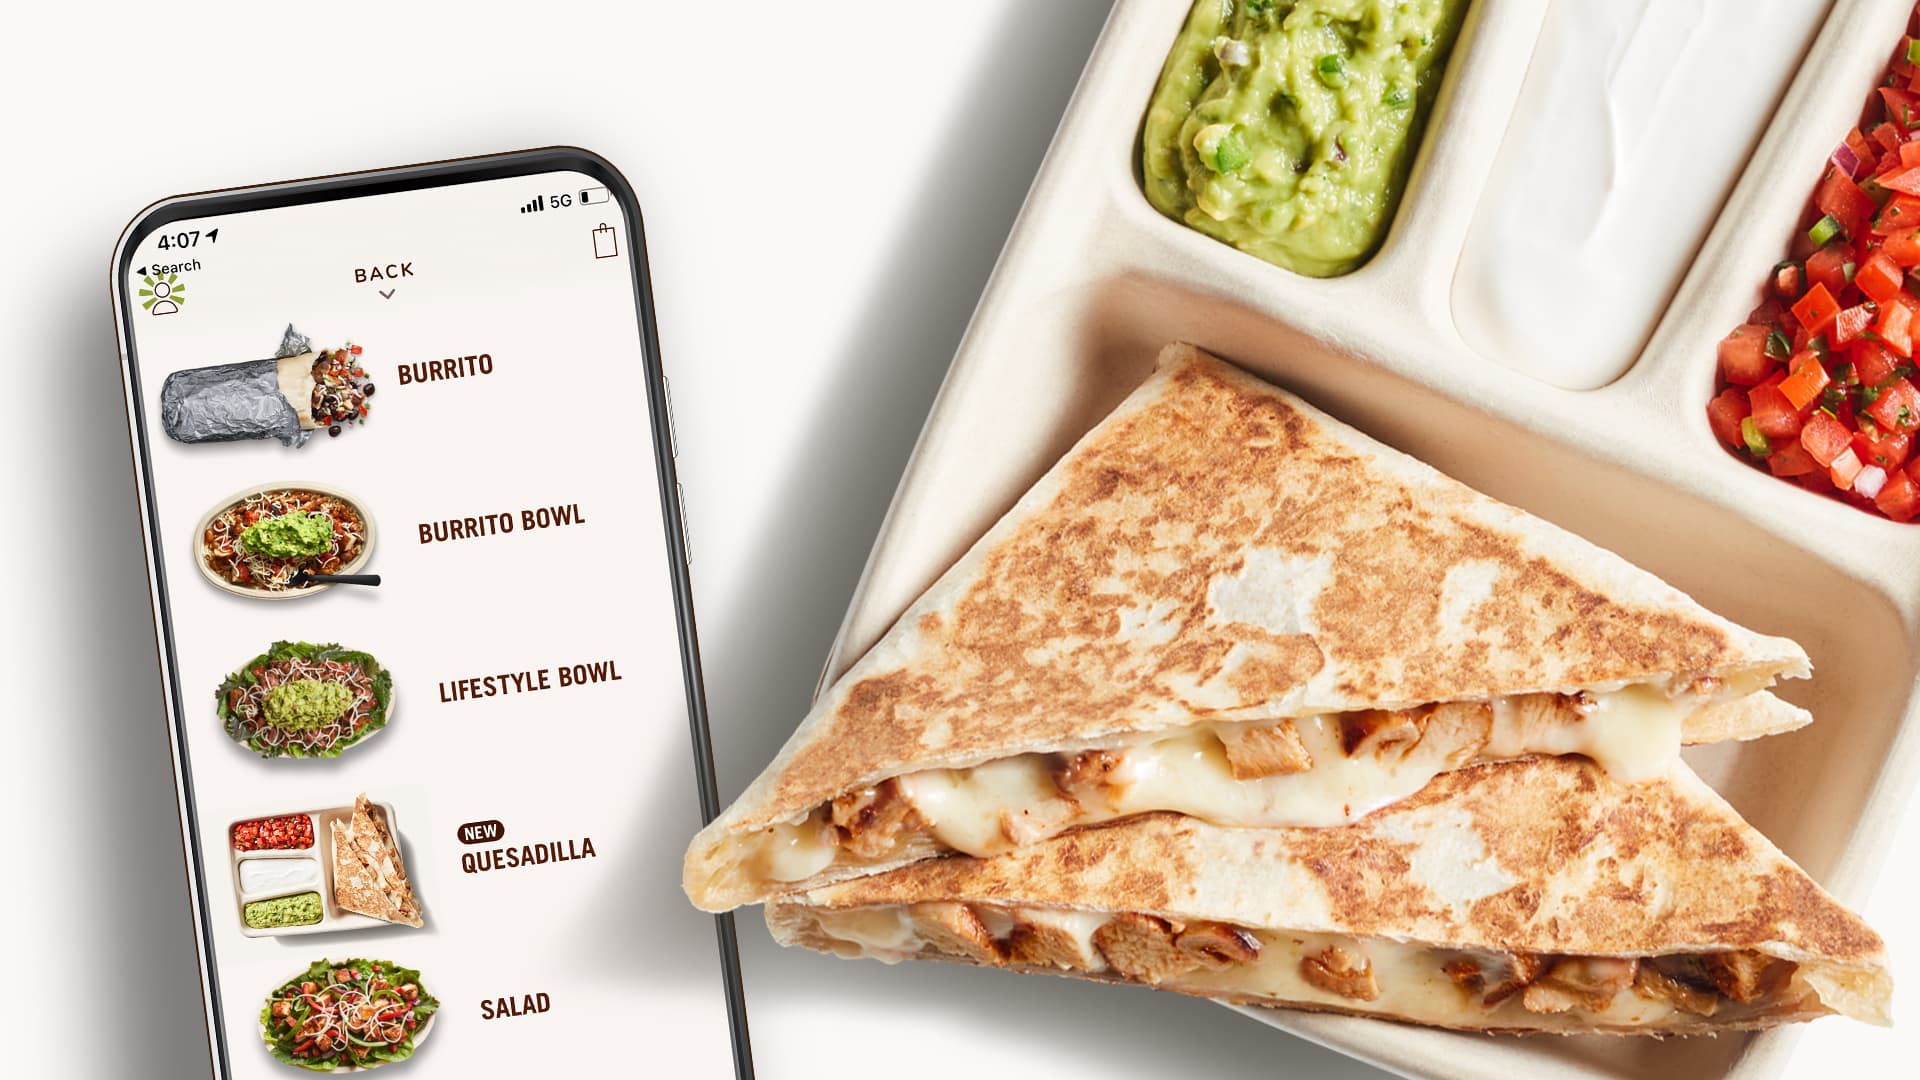 Chipotles quesadillas bring in new customers and contribute to digital sales growth